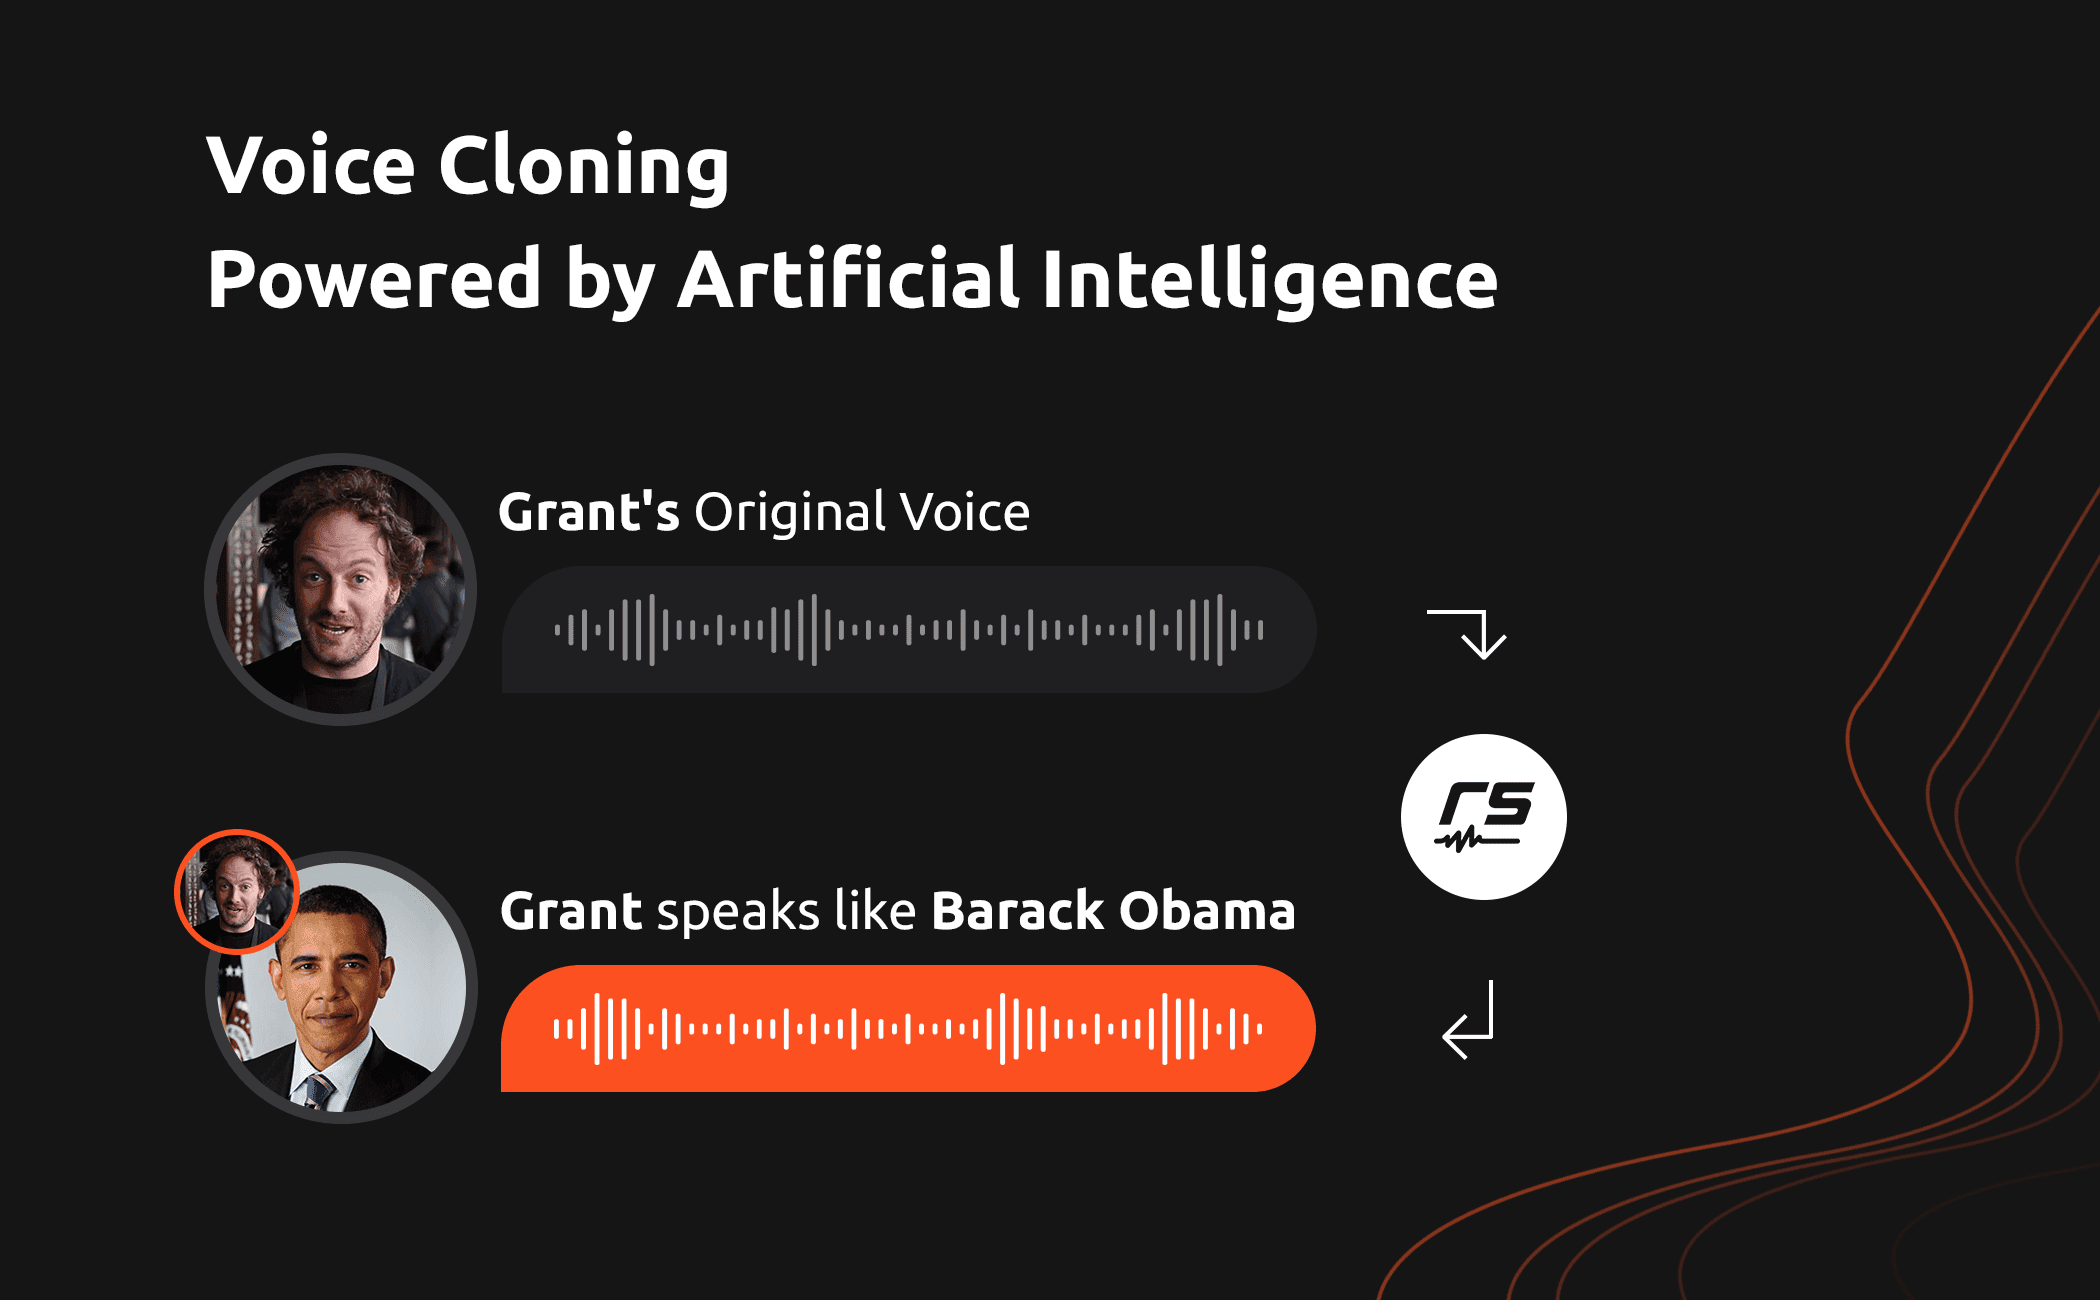 Voice Cloning Product Powered by Artificial Intelligence | Respeecher